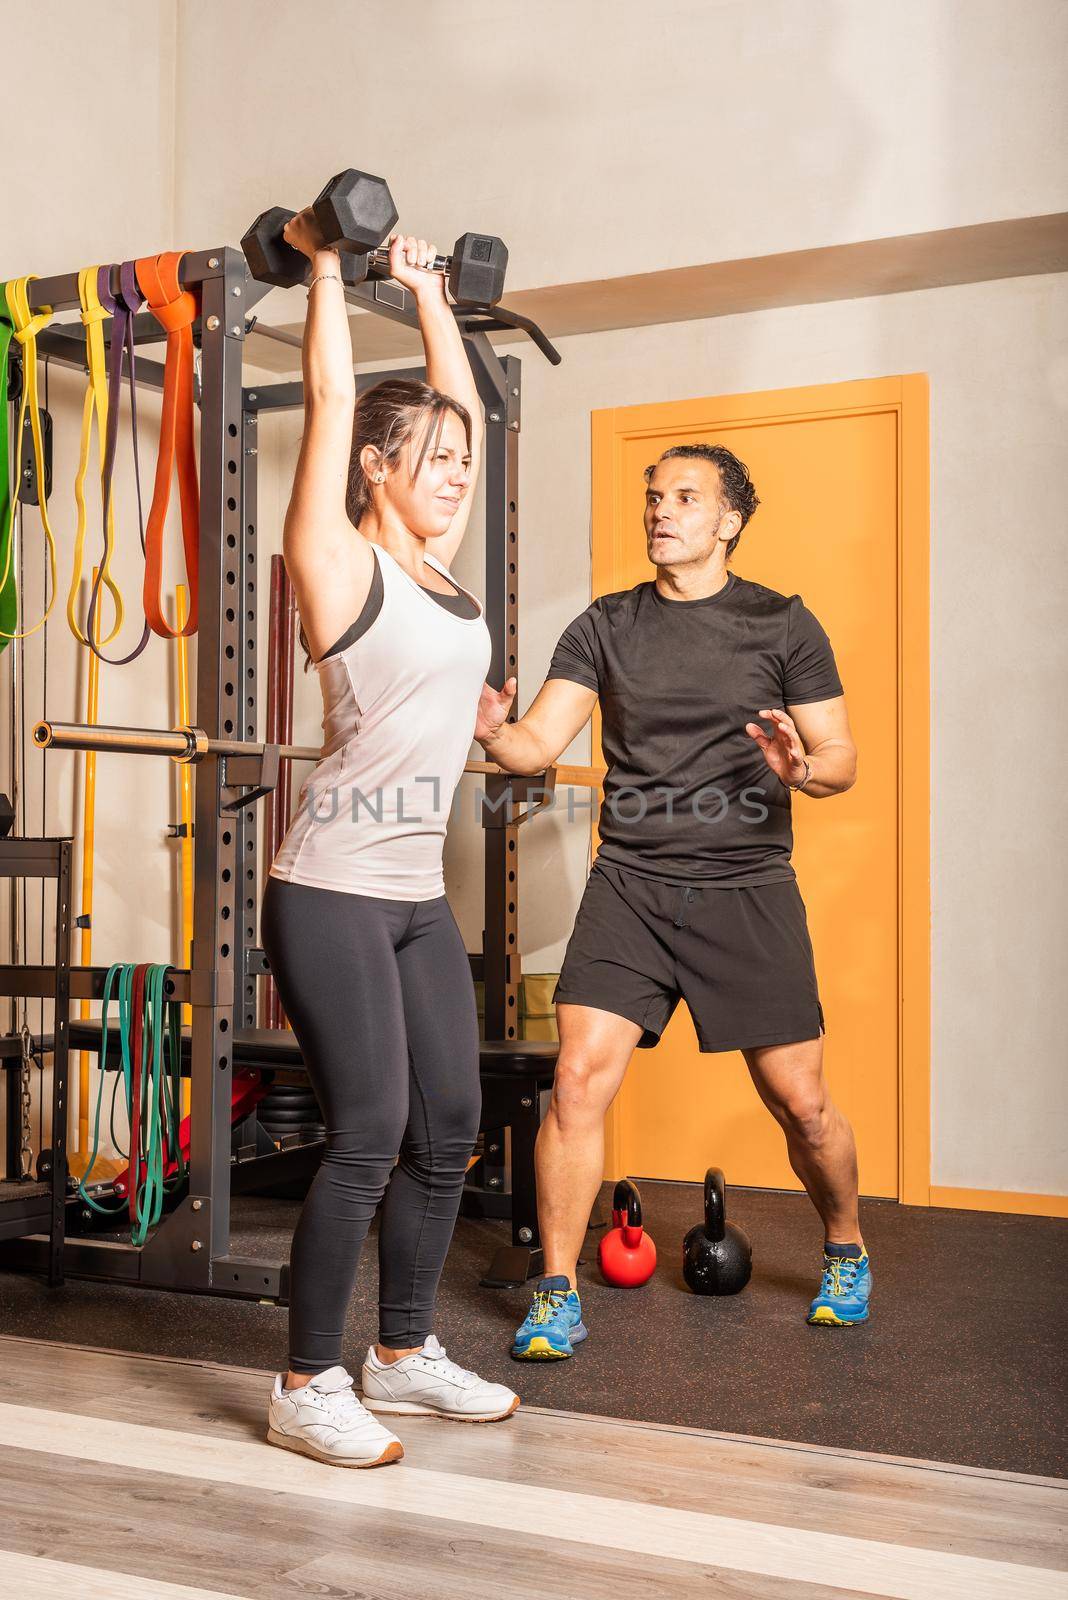 Woman doing shoulder exercise with dumbbells in the gym. Concept of exercise with equipment at gym.